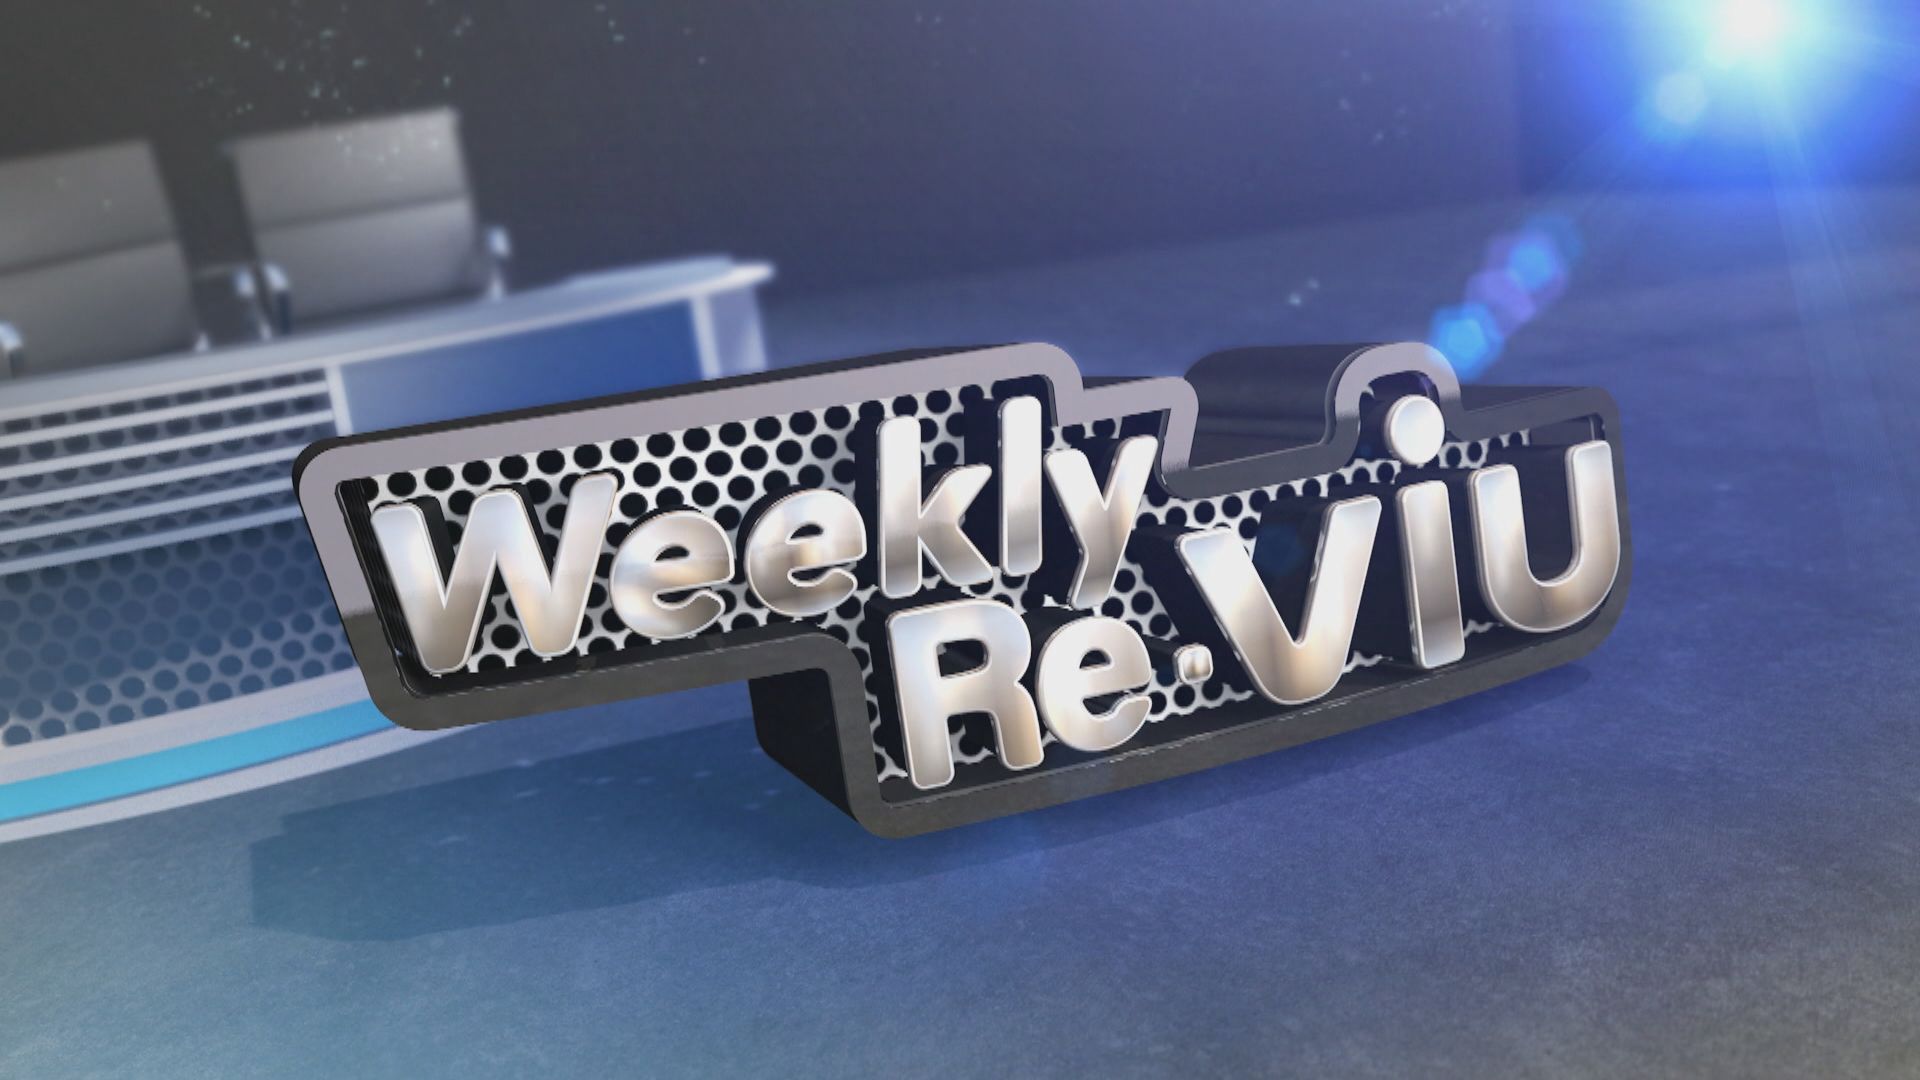 Weekly ReViu | Part Two - Story Roundup (18.3.2023)